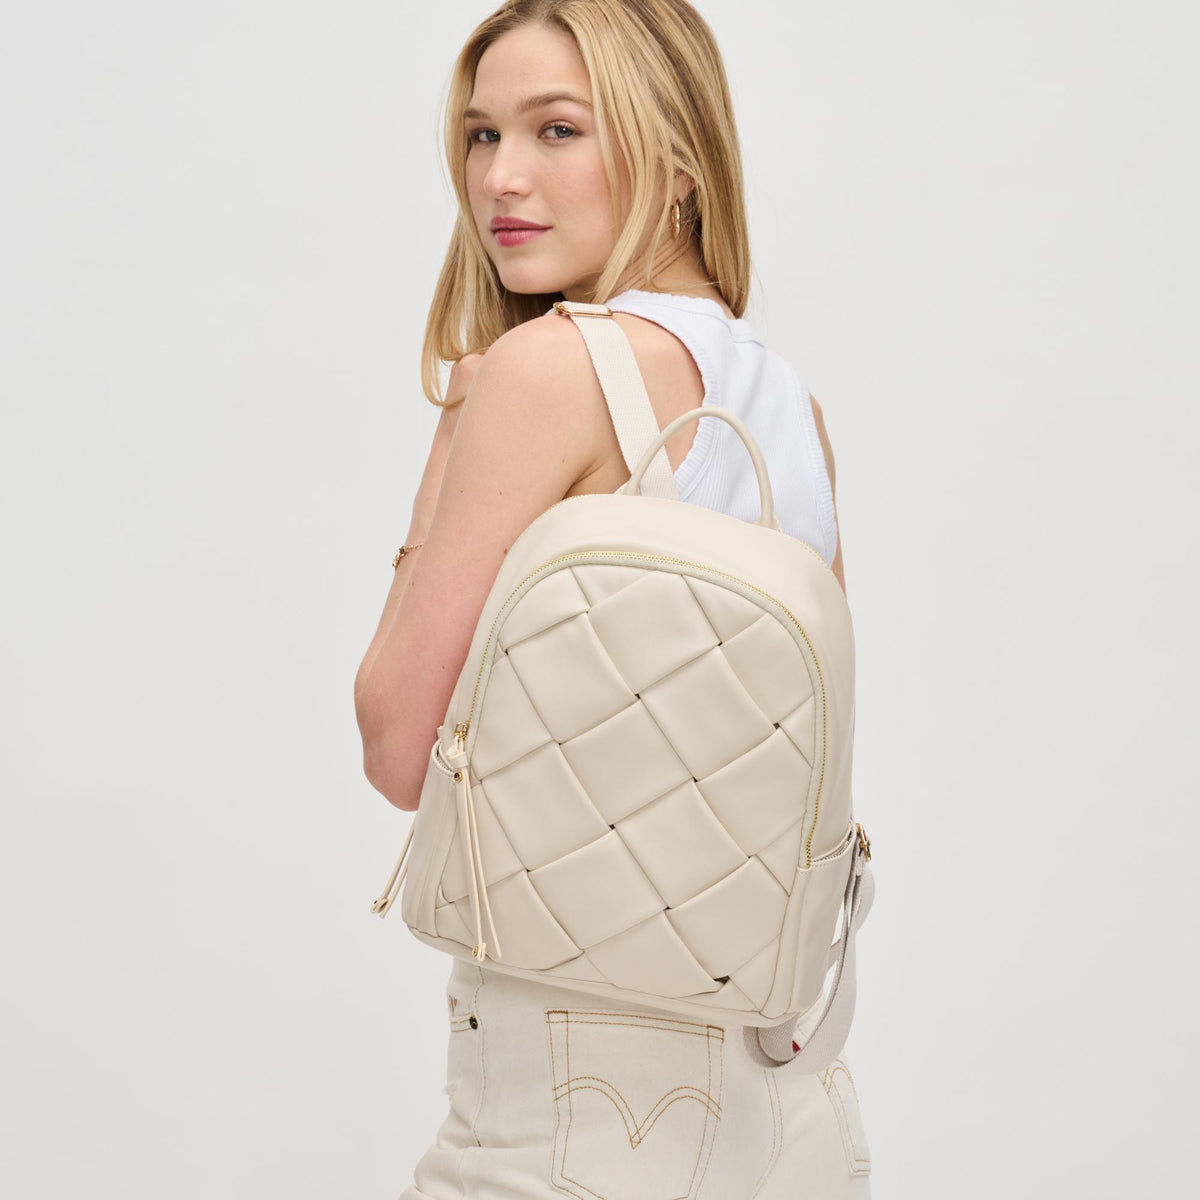 Woman wearing Oatmilk Urban Expressions Blossom Backpack 840611130648 View 2 | Oatmilk